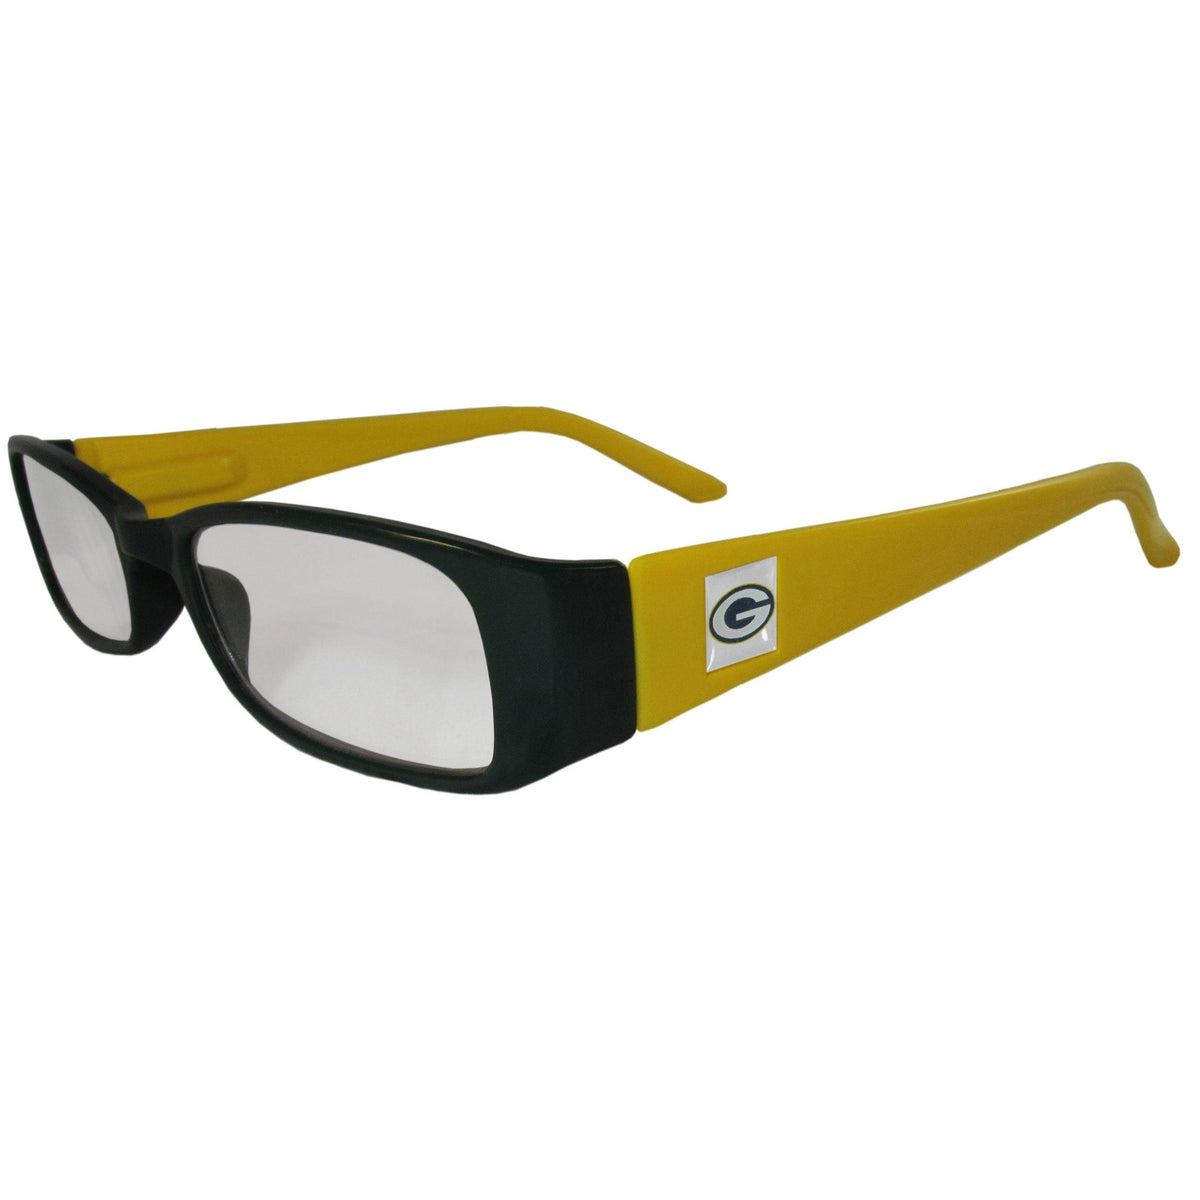 Green Bay Packers Reading Glasses +1.25 - Flyclothing LLC